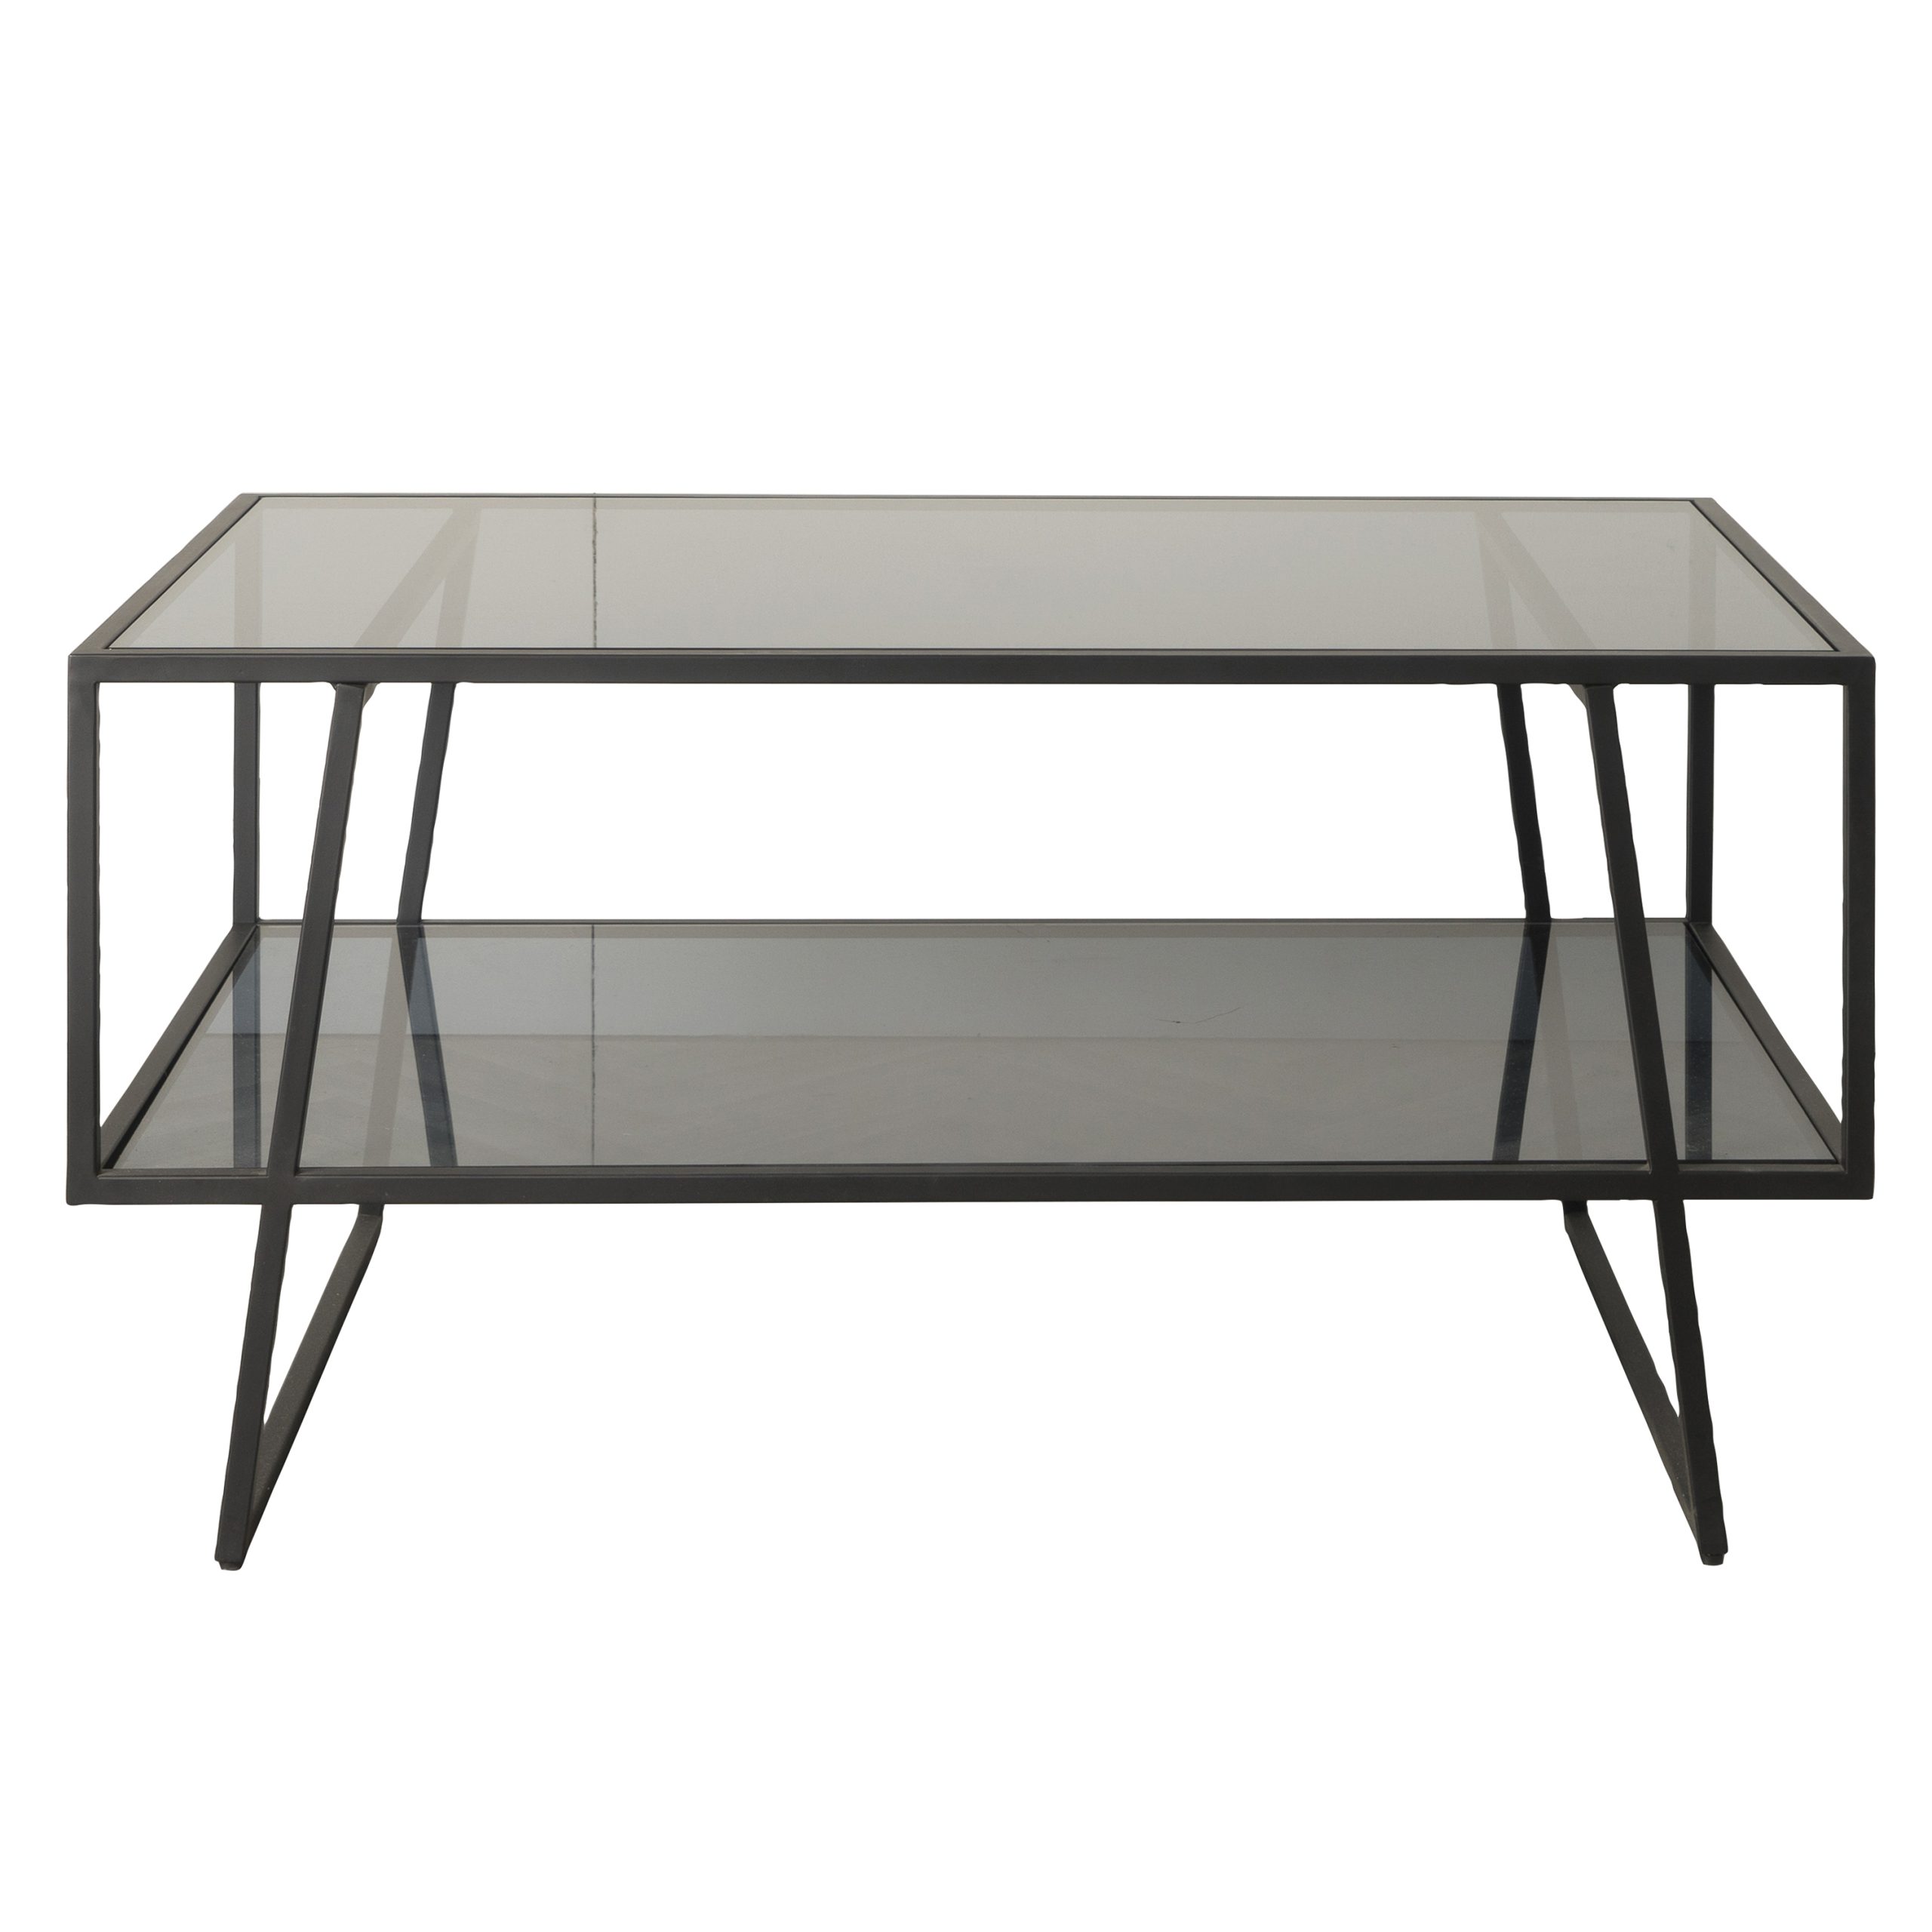 Gallery Direct Putney Coffee Table